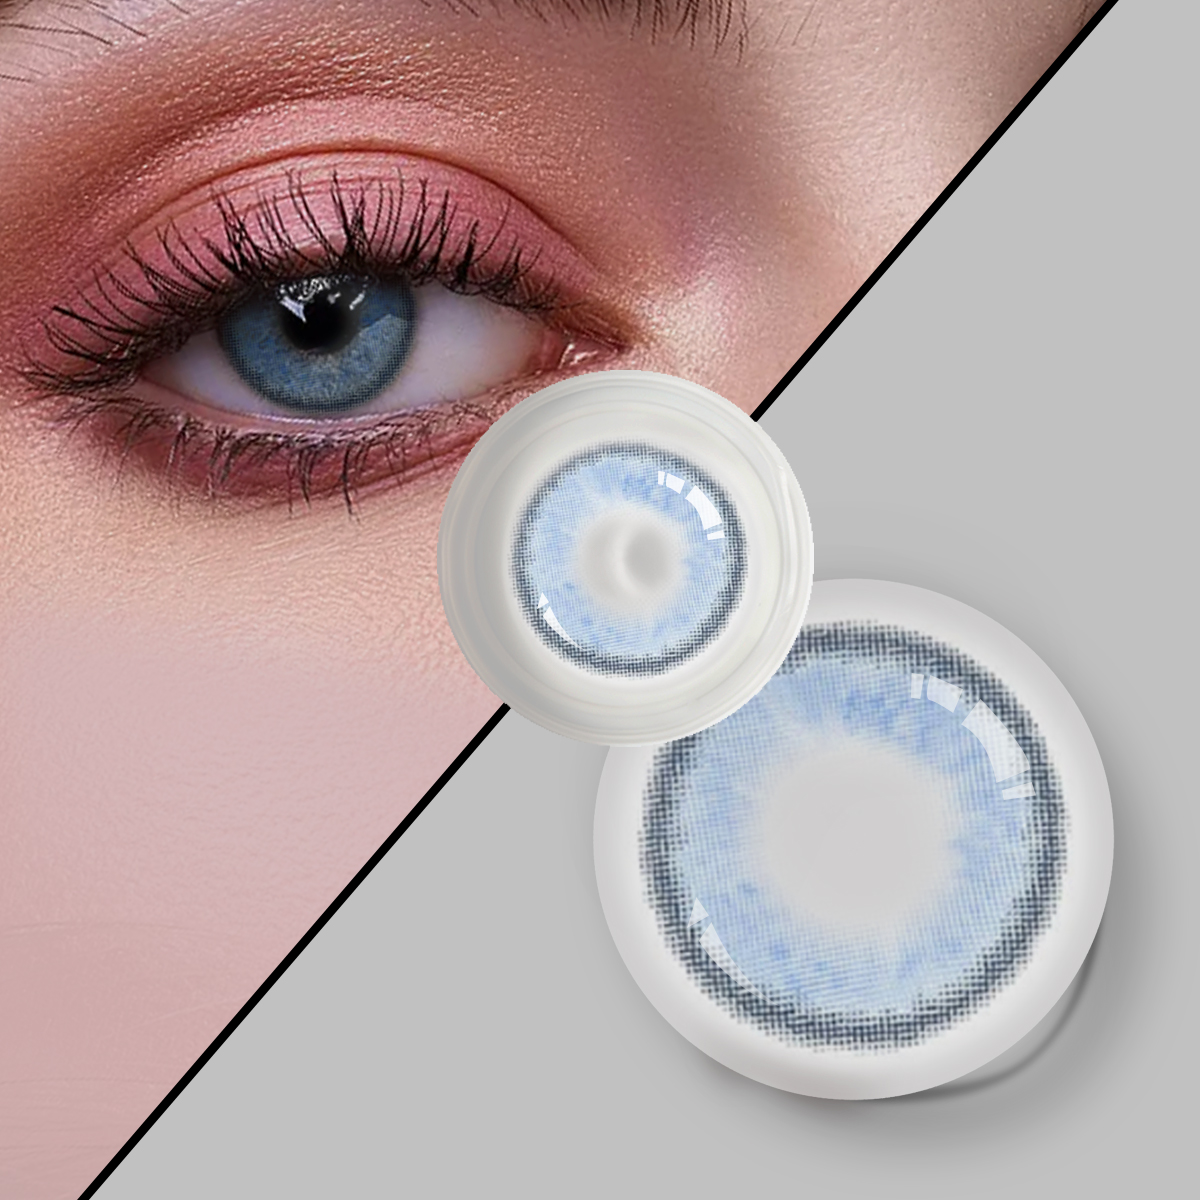 New Arrival Best Prices 14.5 mm blue Contact Lenses Colored Contact Lens Eye